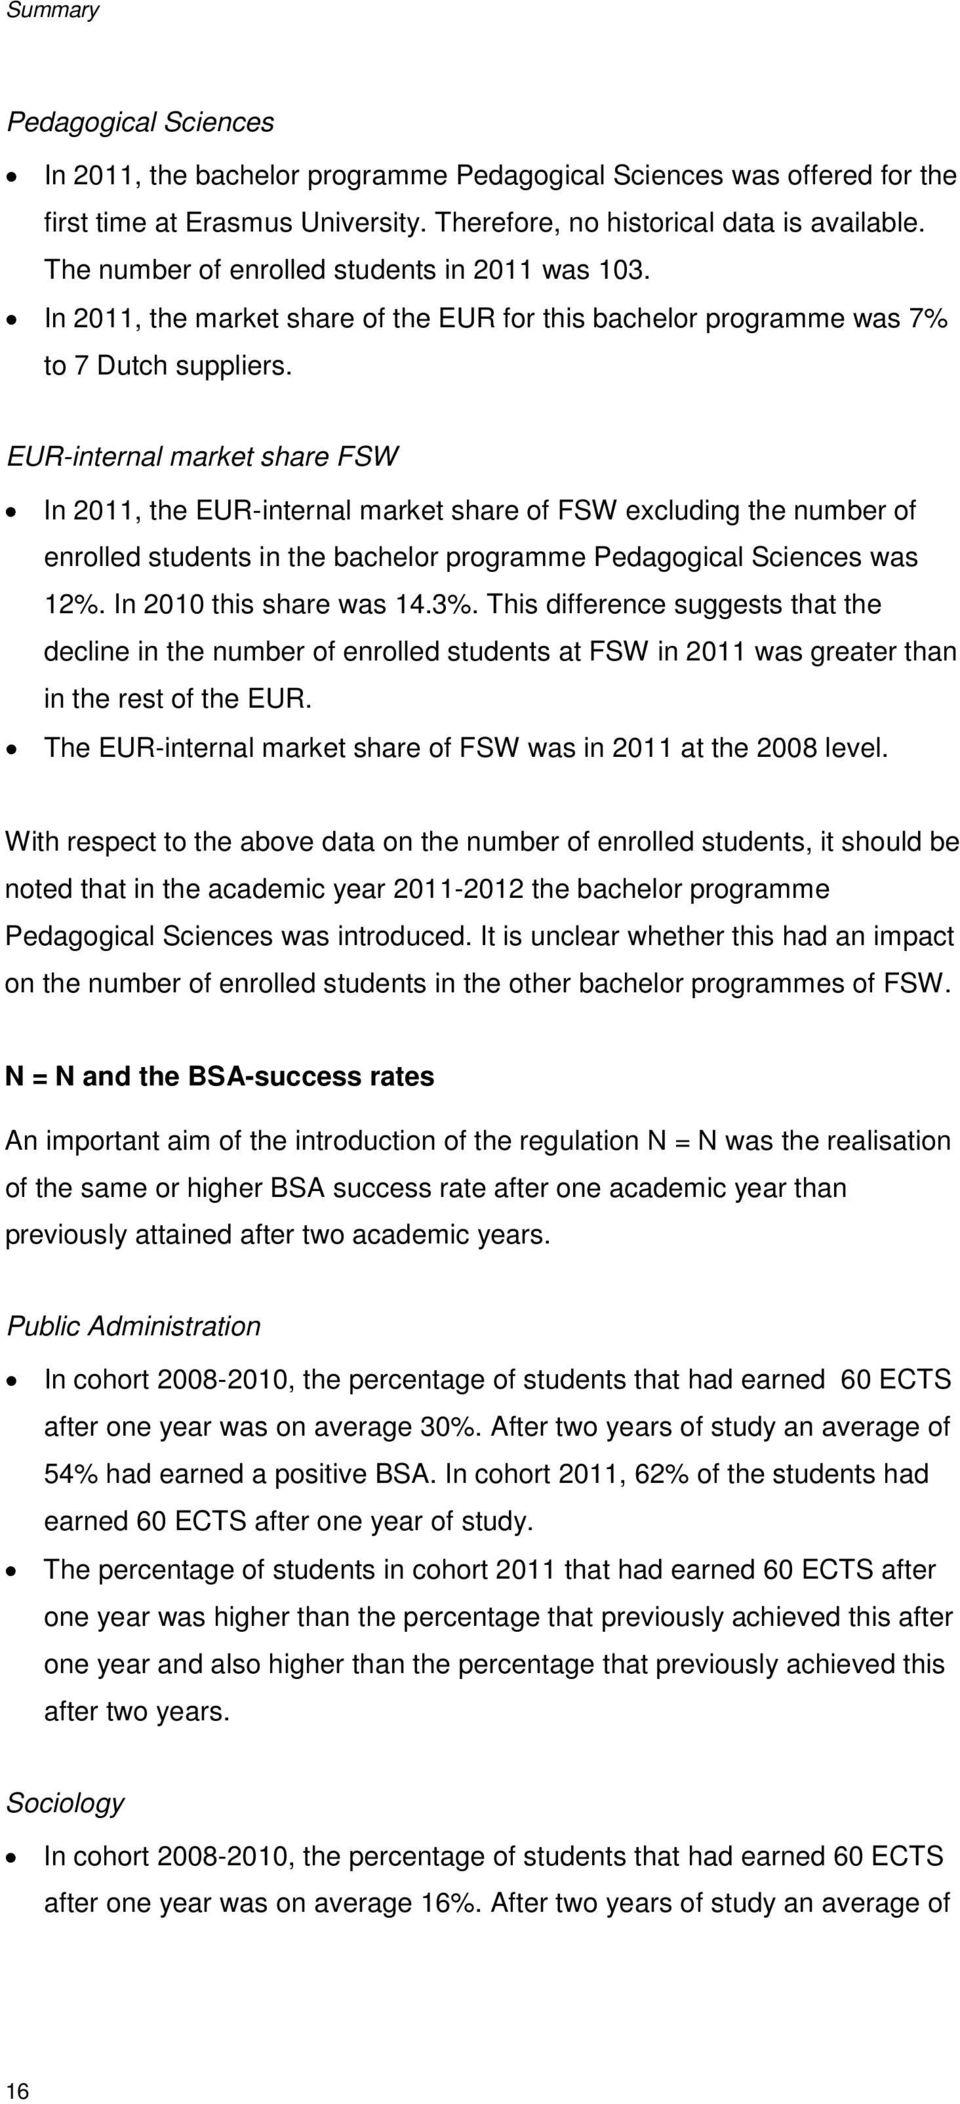 EUR-internal market share FSW In 2011, the EUR-internal market share of FSW excluding the number of enrolled students in the bachelor programme Pedagogical Sciences was 12%. In 2010 this share was 14.